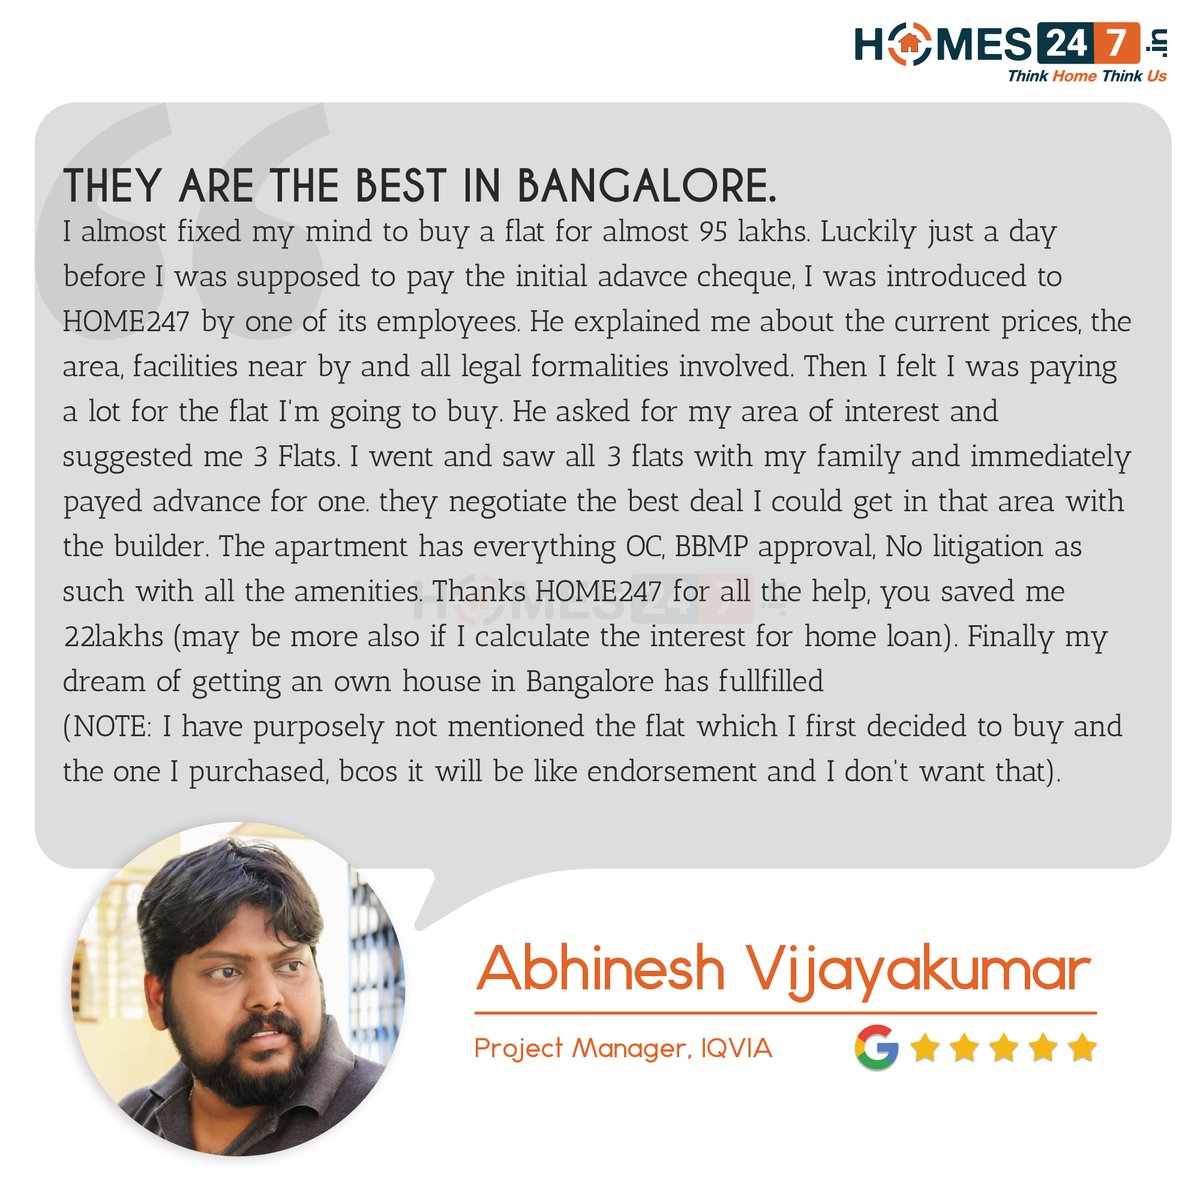 Thanks A Ton, Abhinesh! We are so excited to share your elaborate review!

We are so happy to hear that you feel we are the #BestinBangalore! We are striving hard exactly for that! 

#homes247 #thinkhomethinkus #happyclient #bangalorerealestate #indianrealestate